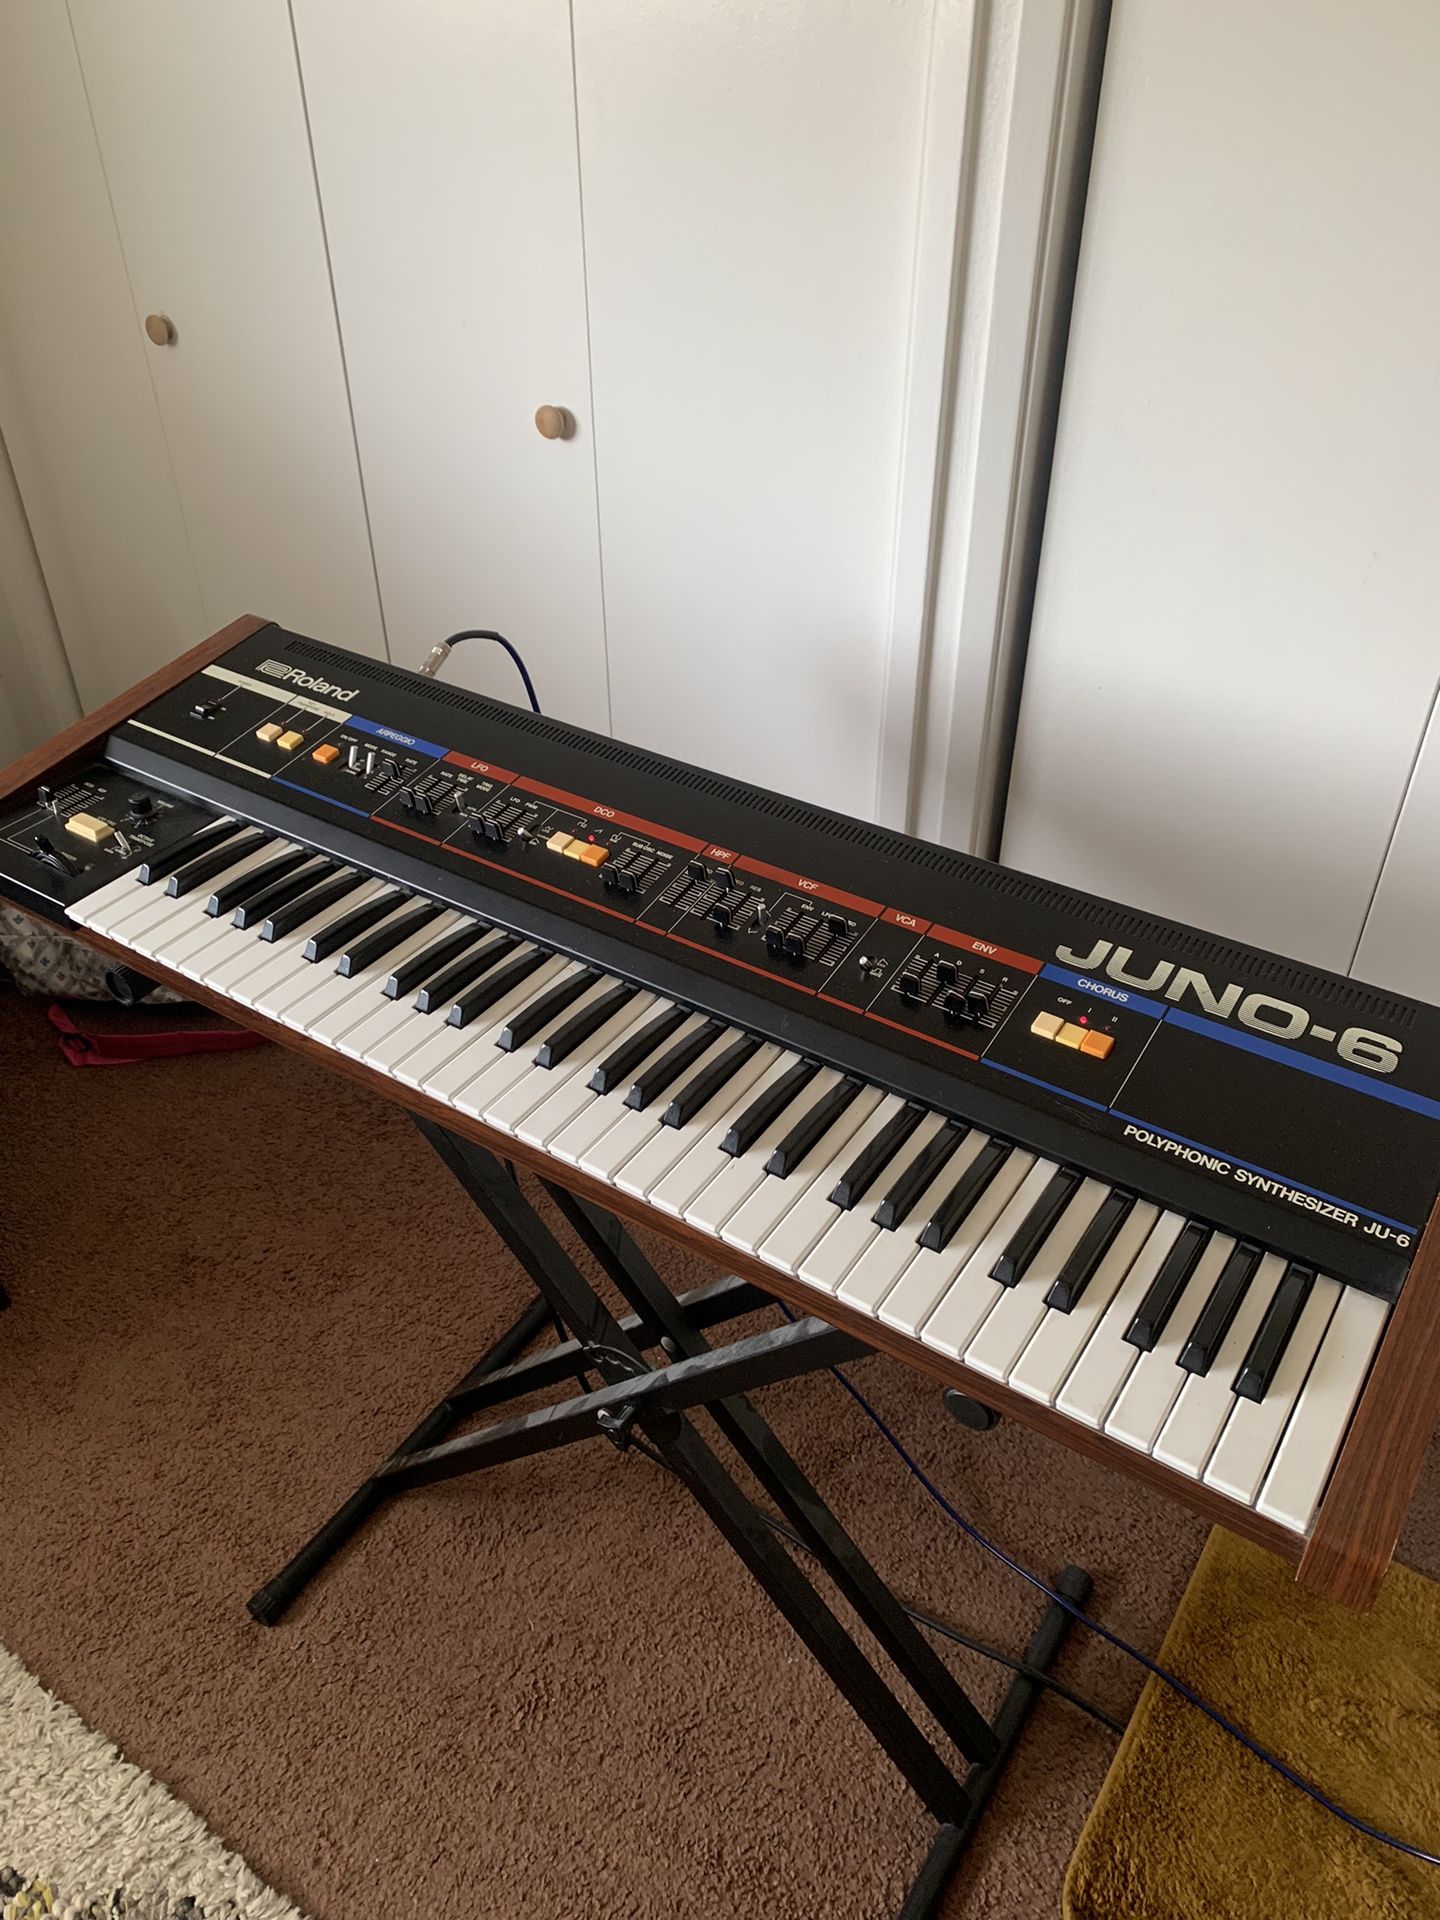 Roland Juno 6 80s Vintage Synthesizer